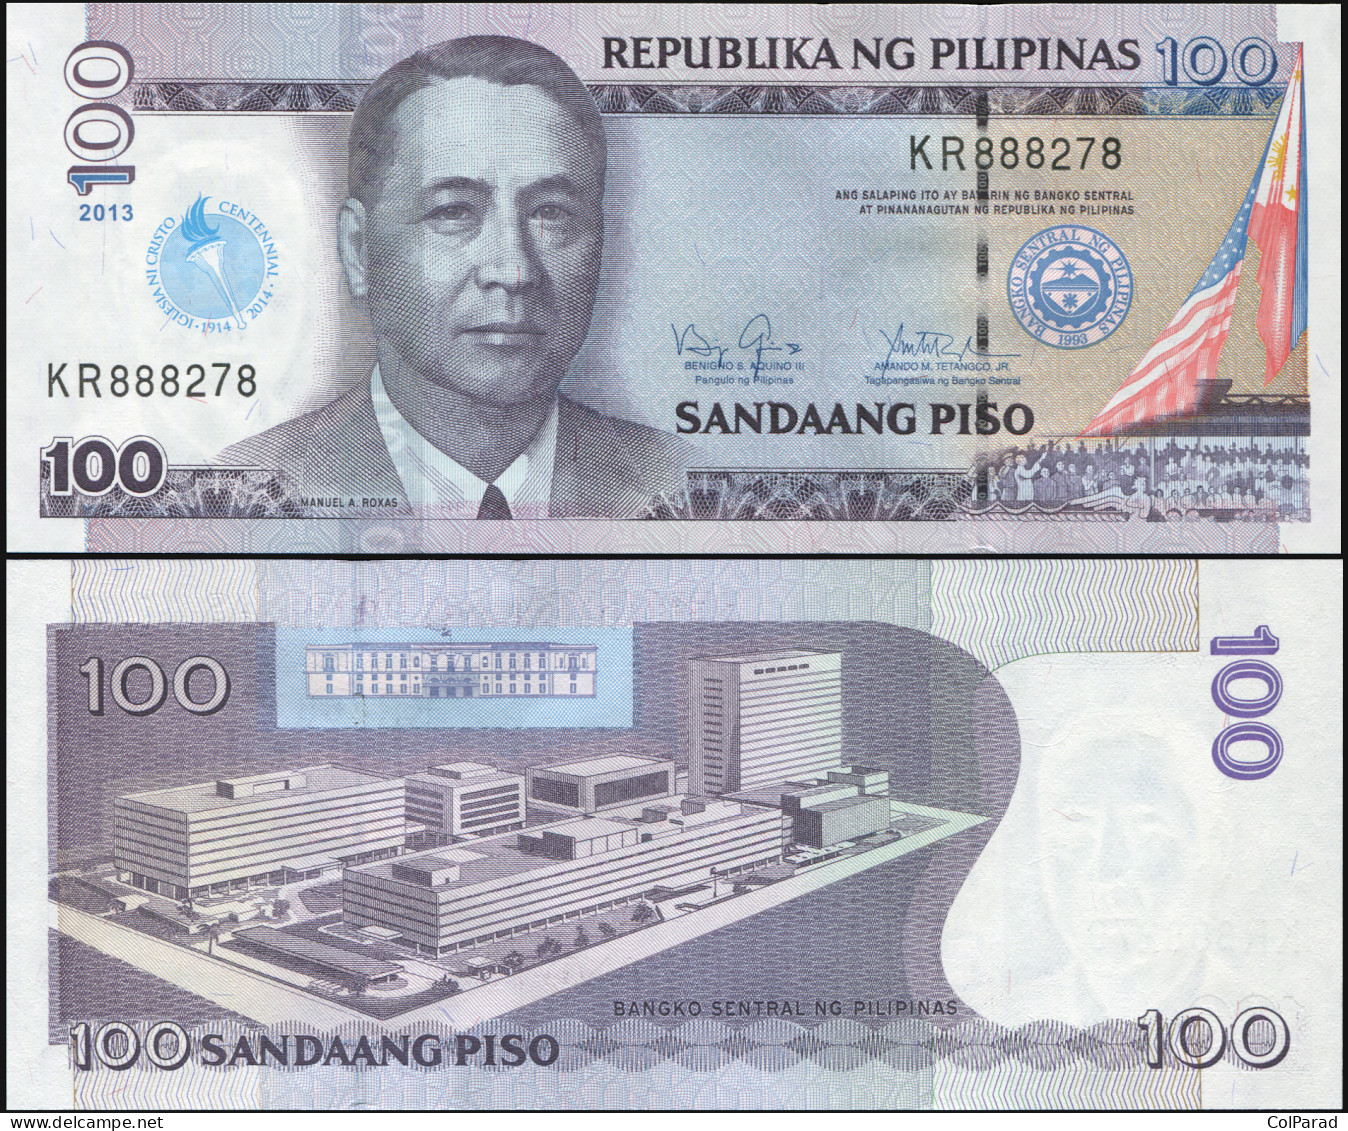 PHILIPPINES 100 PISO - 2013 - Paper Unc - P.221a Banknote - Church Of Christ - Philippines